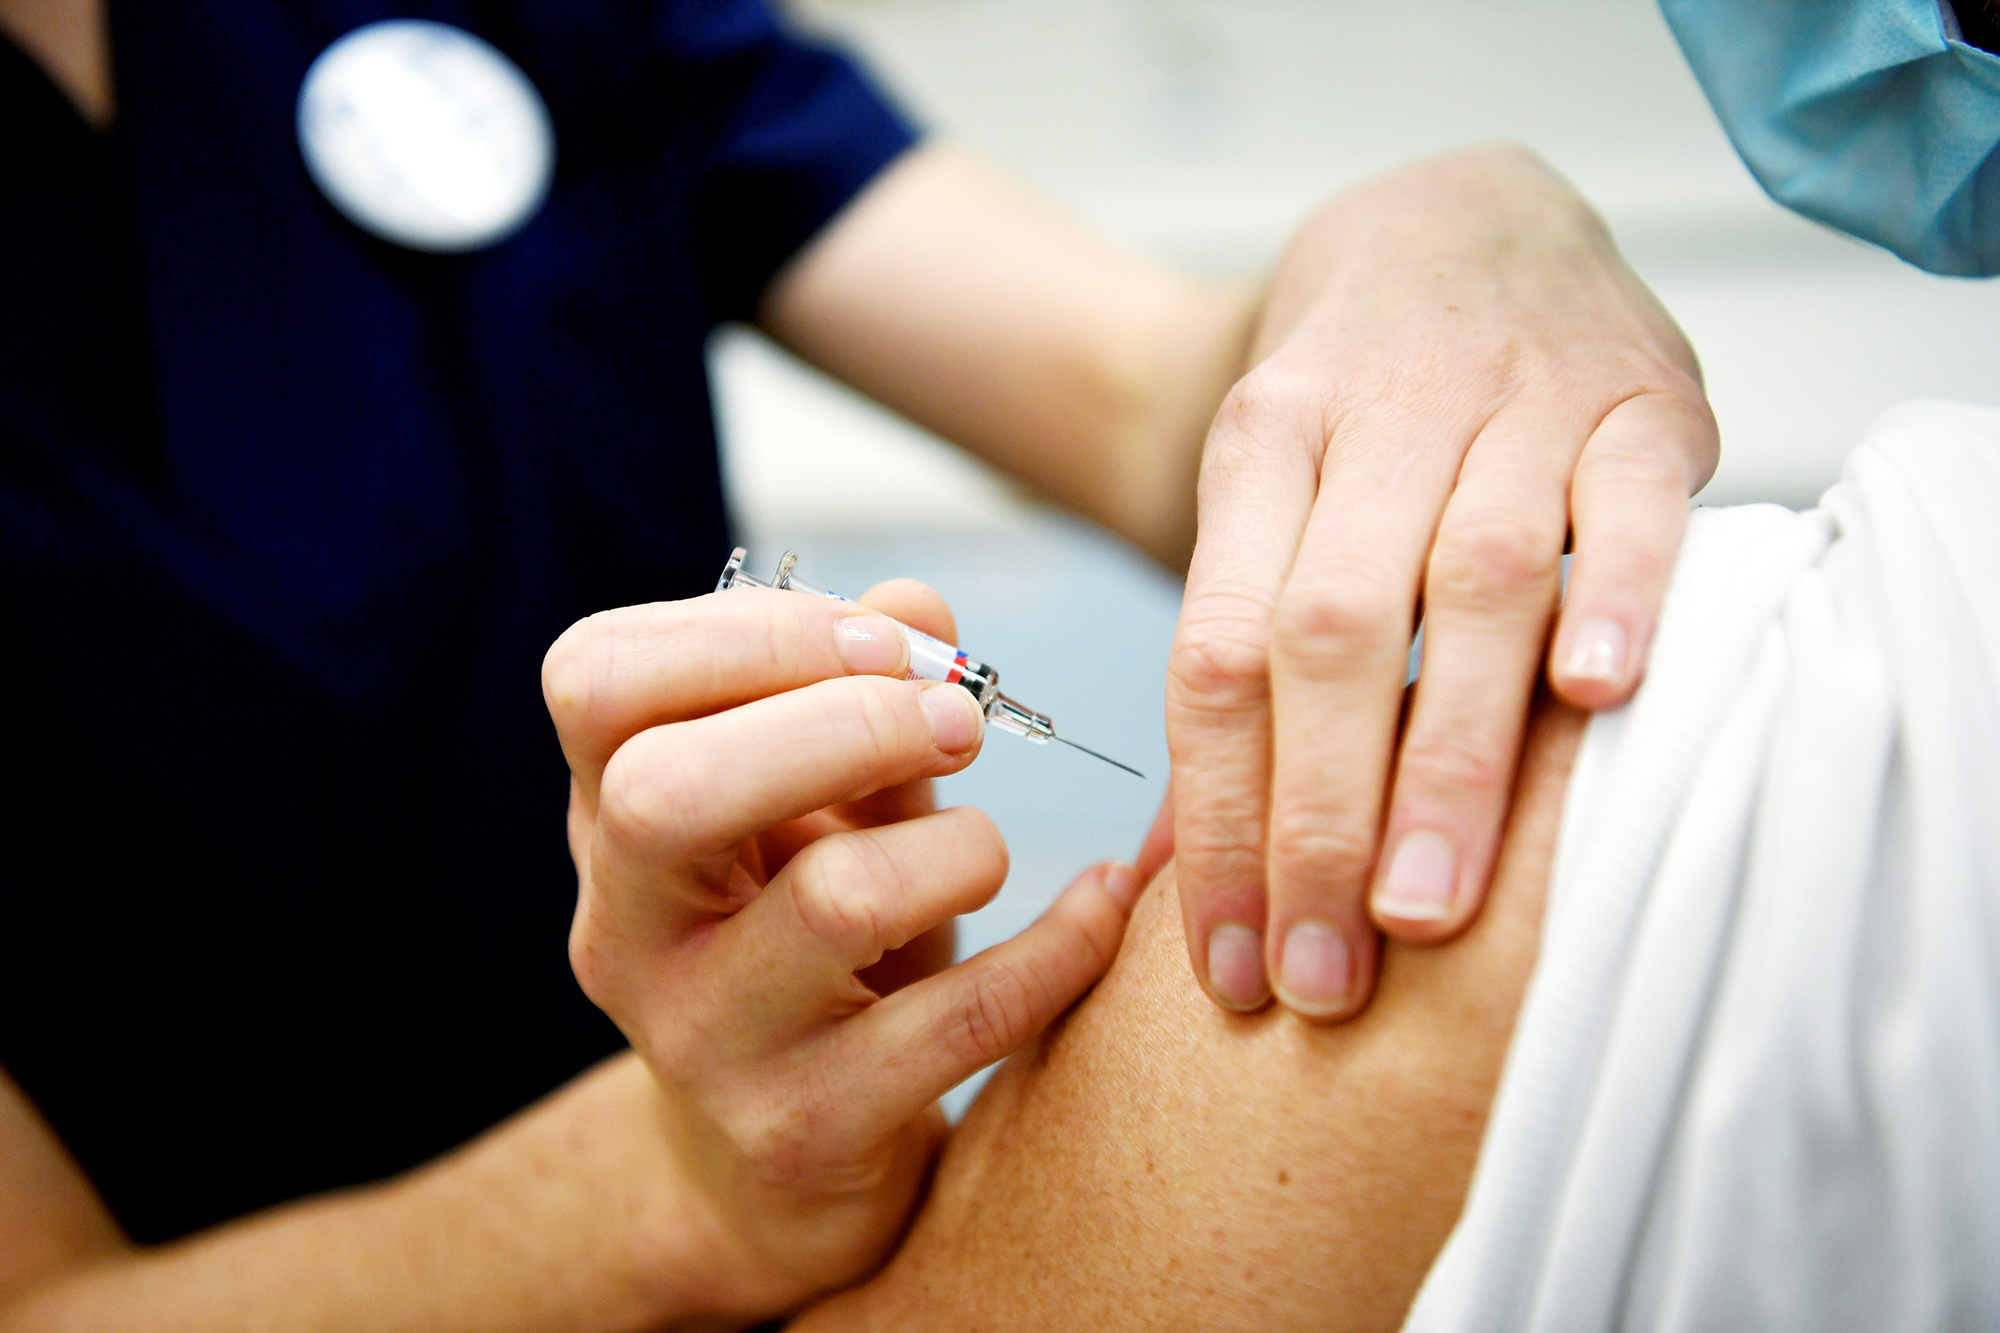 There is a shortage of influenza vaccines in Finland